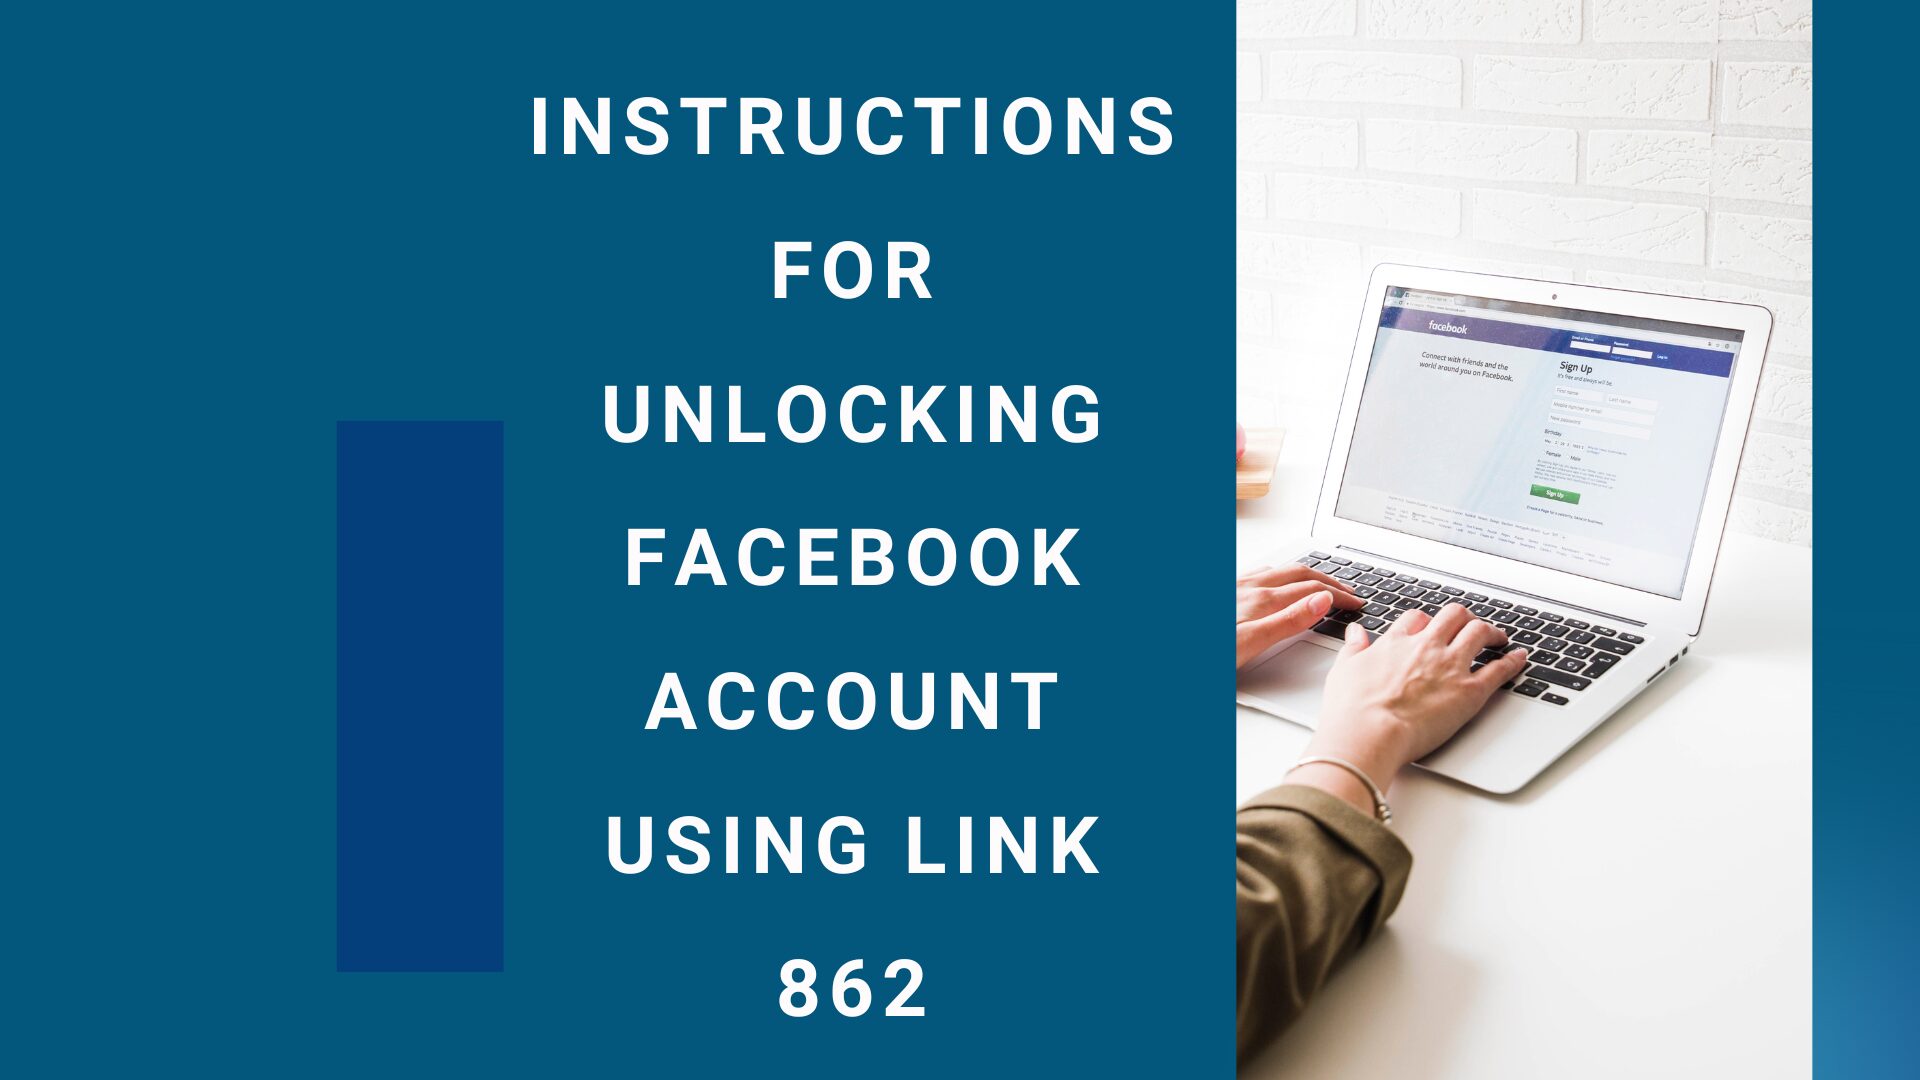 Instructions for unlocking Facebook account using link 862